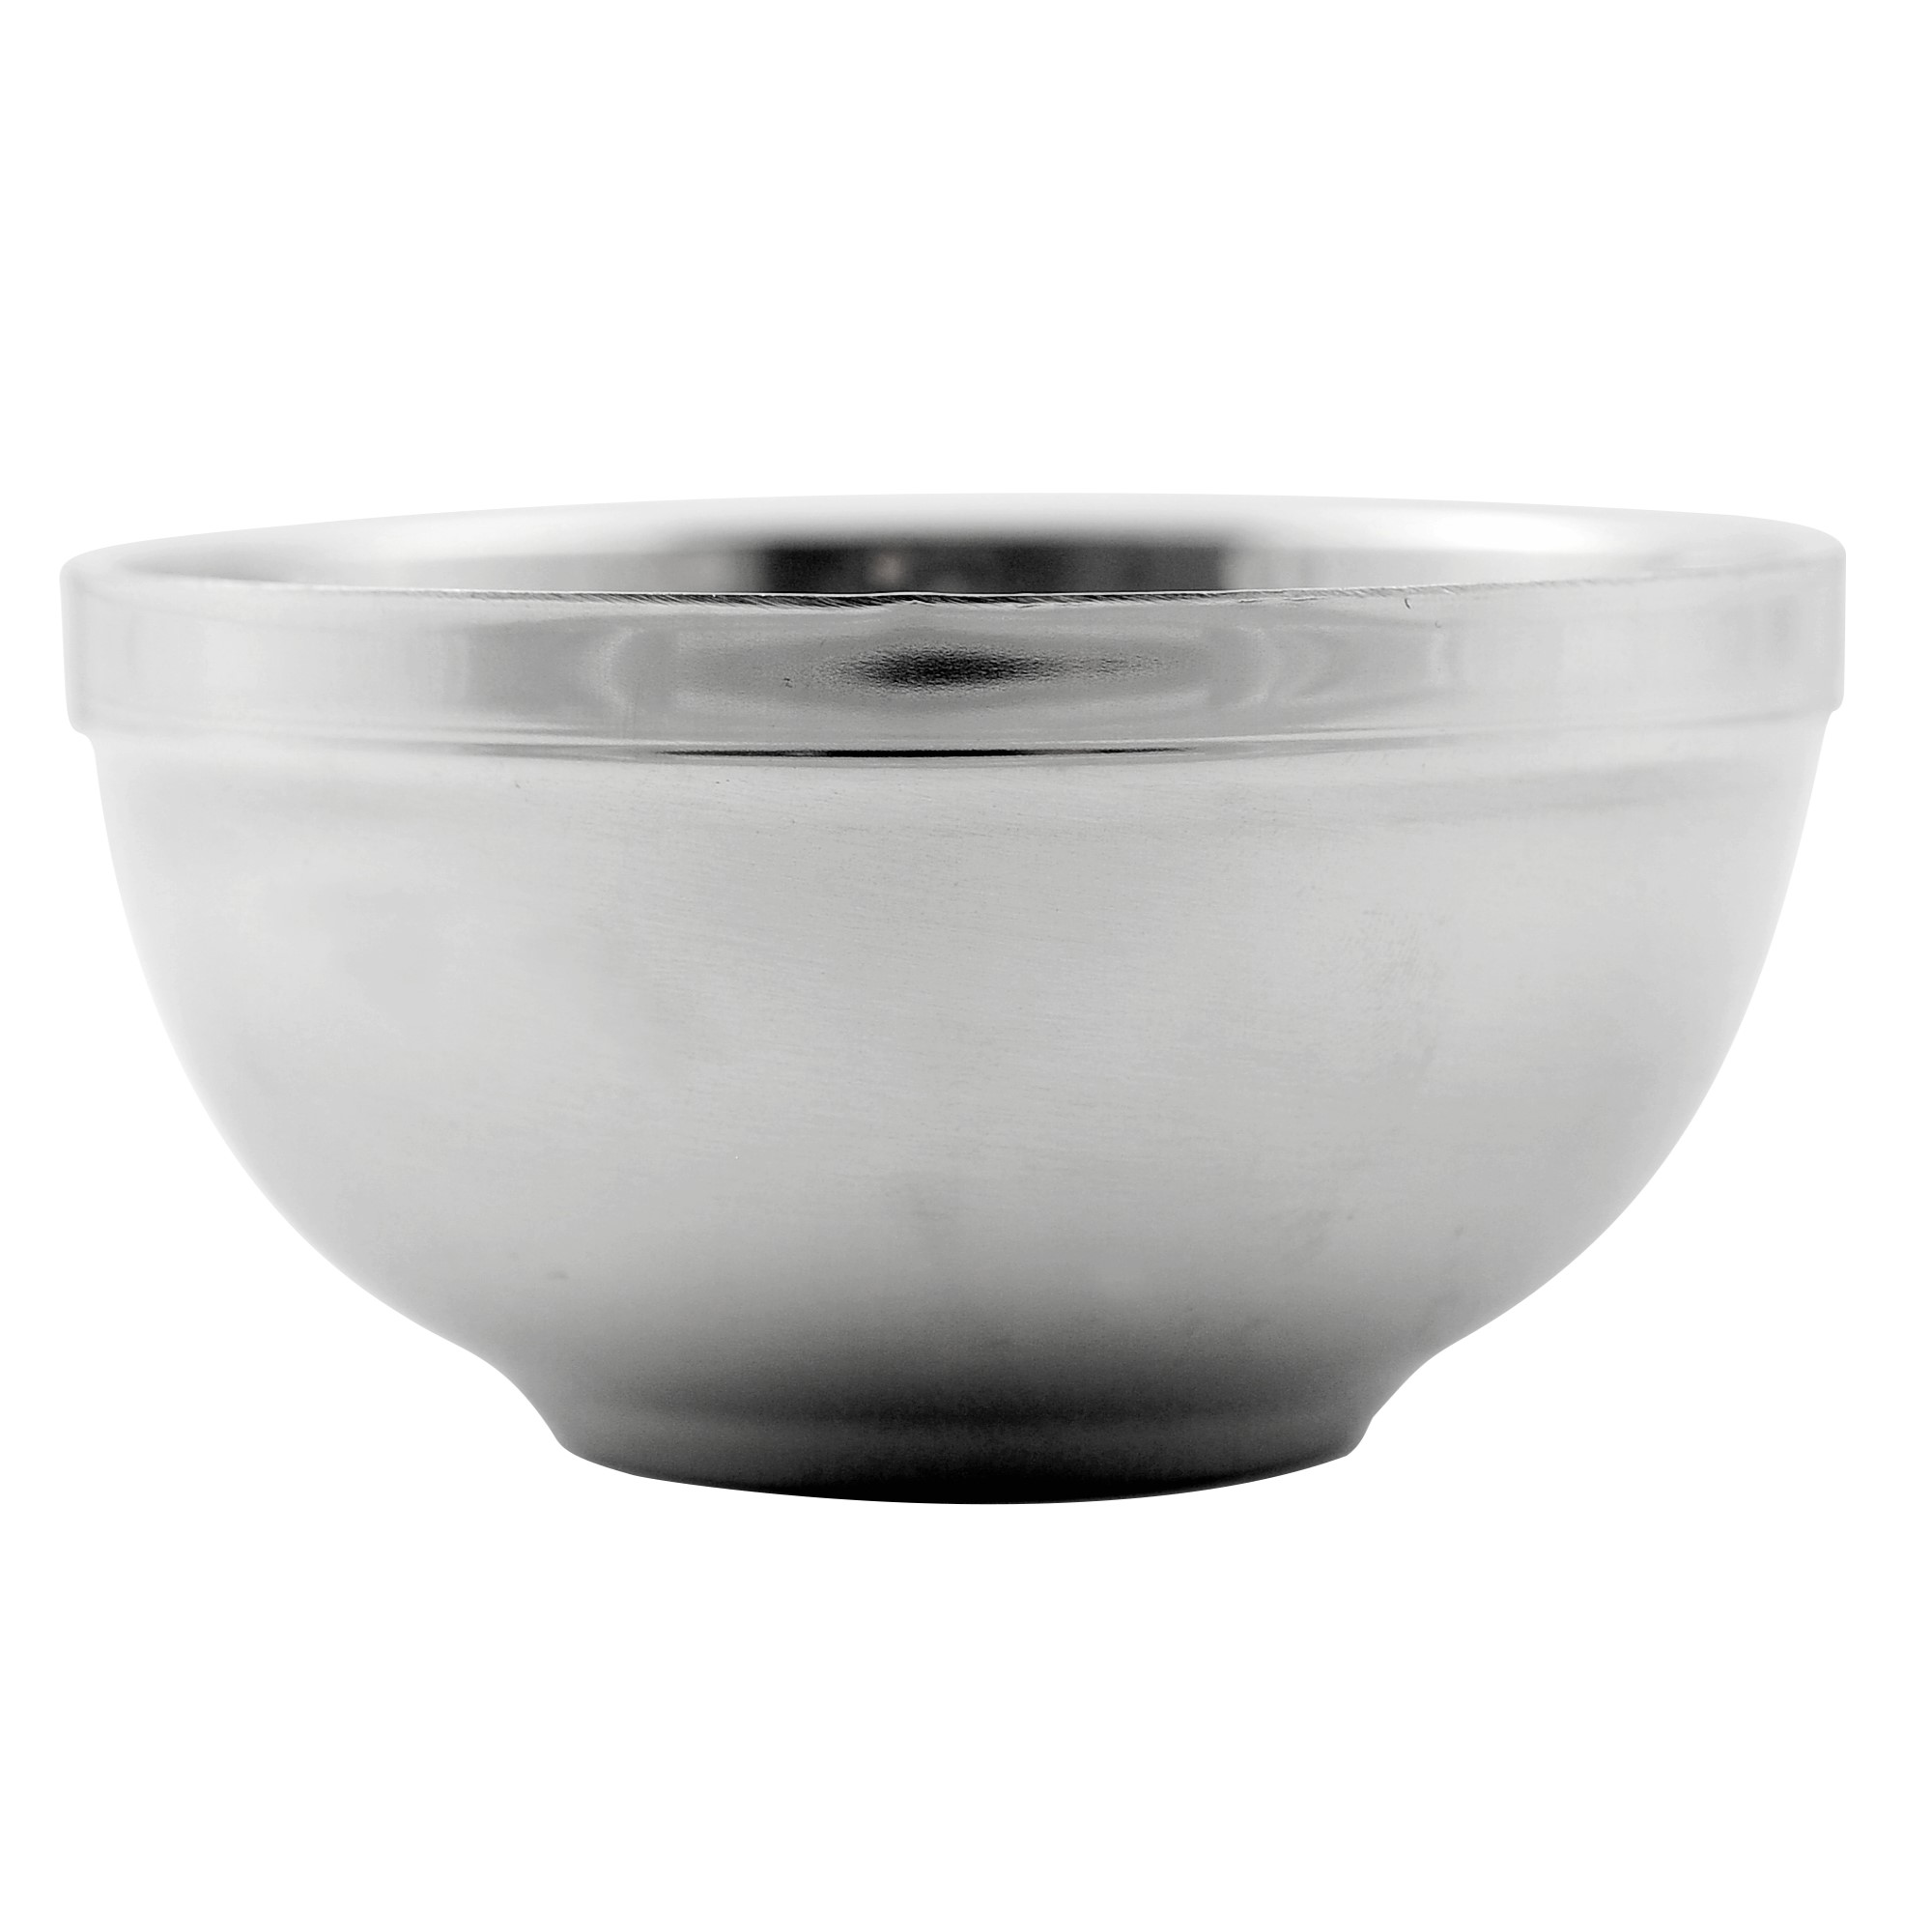 Double-layer insulation bowl 18CM, , large